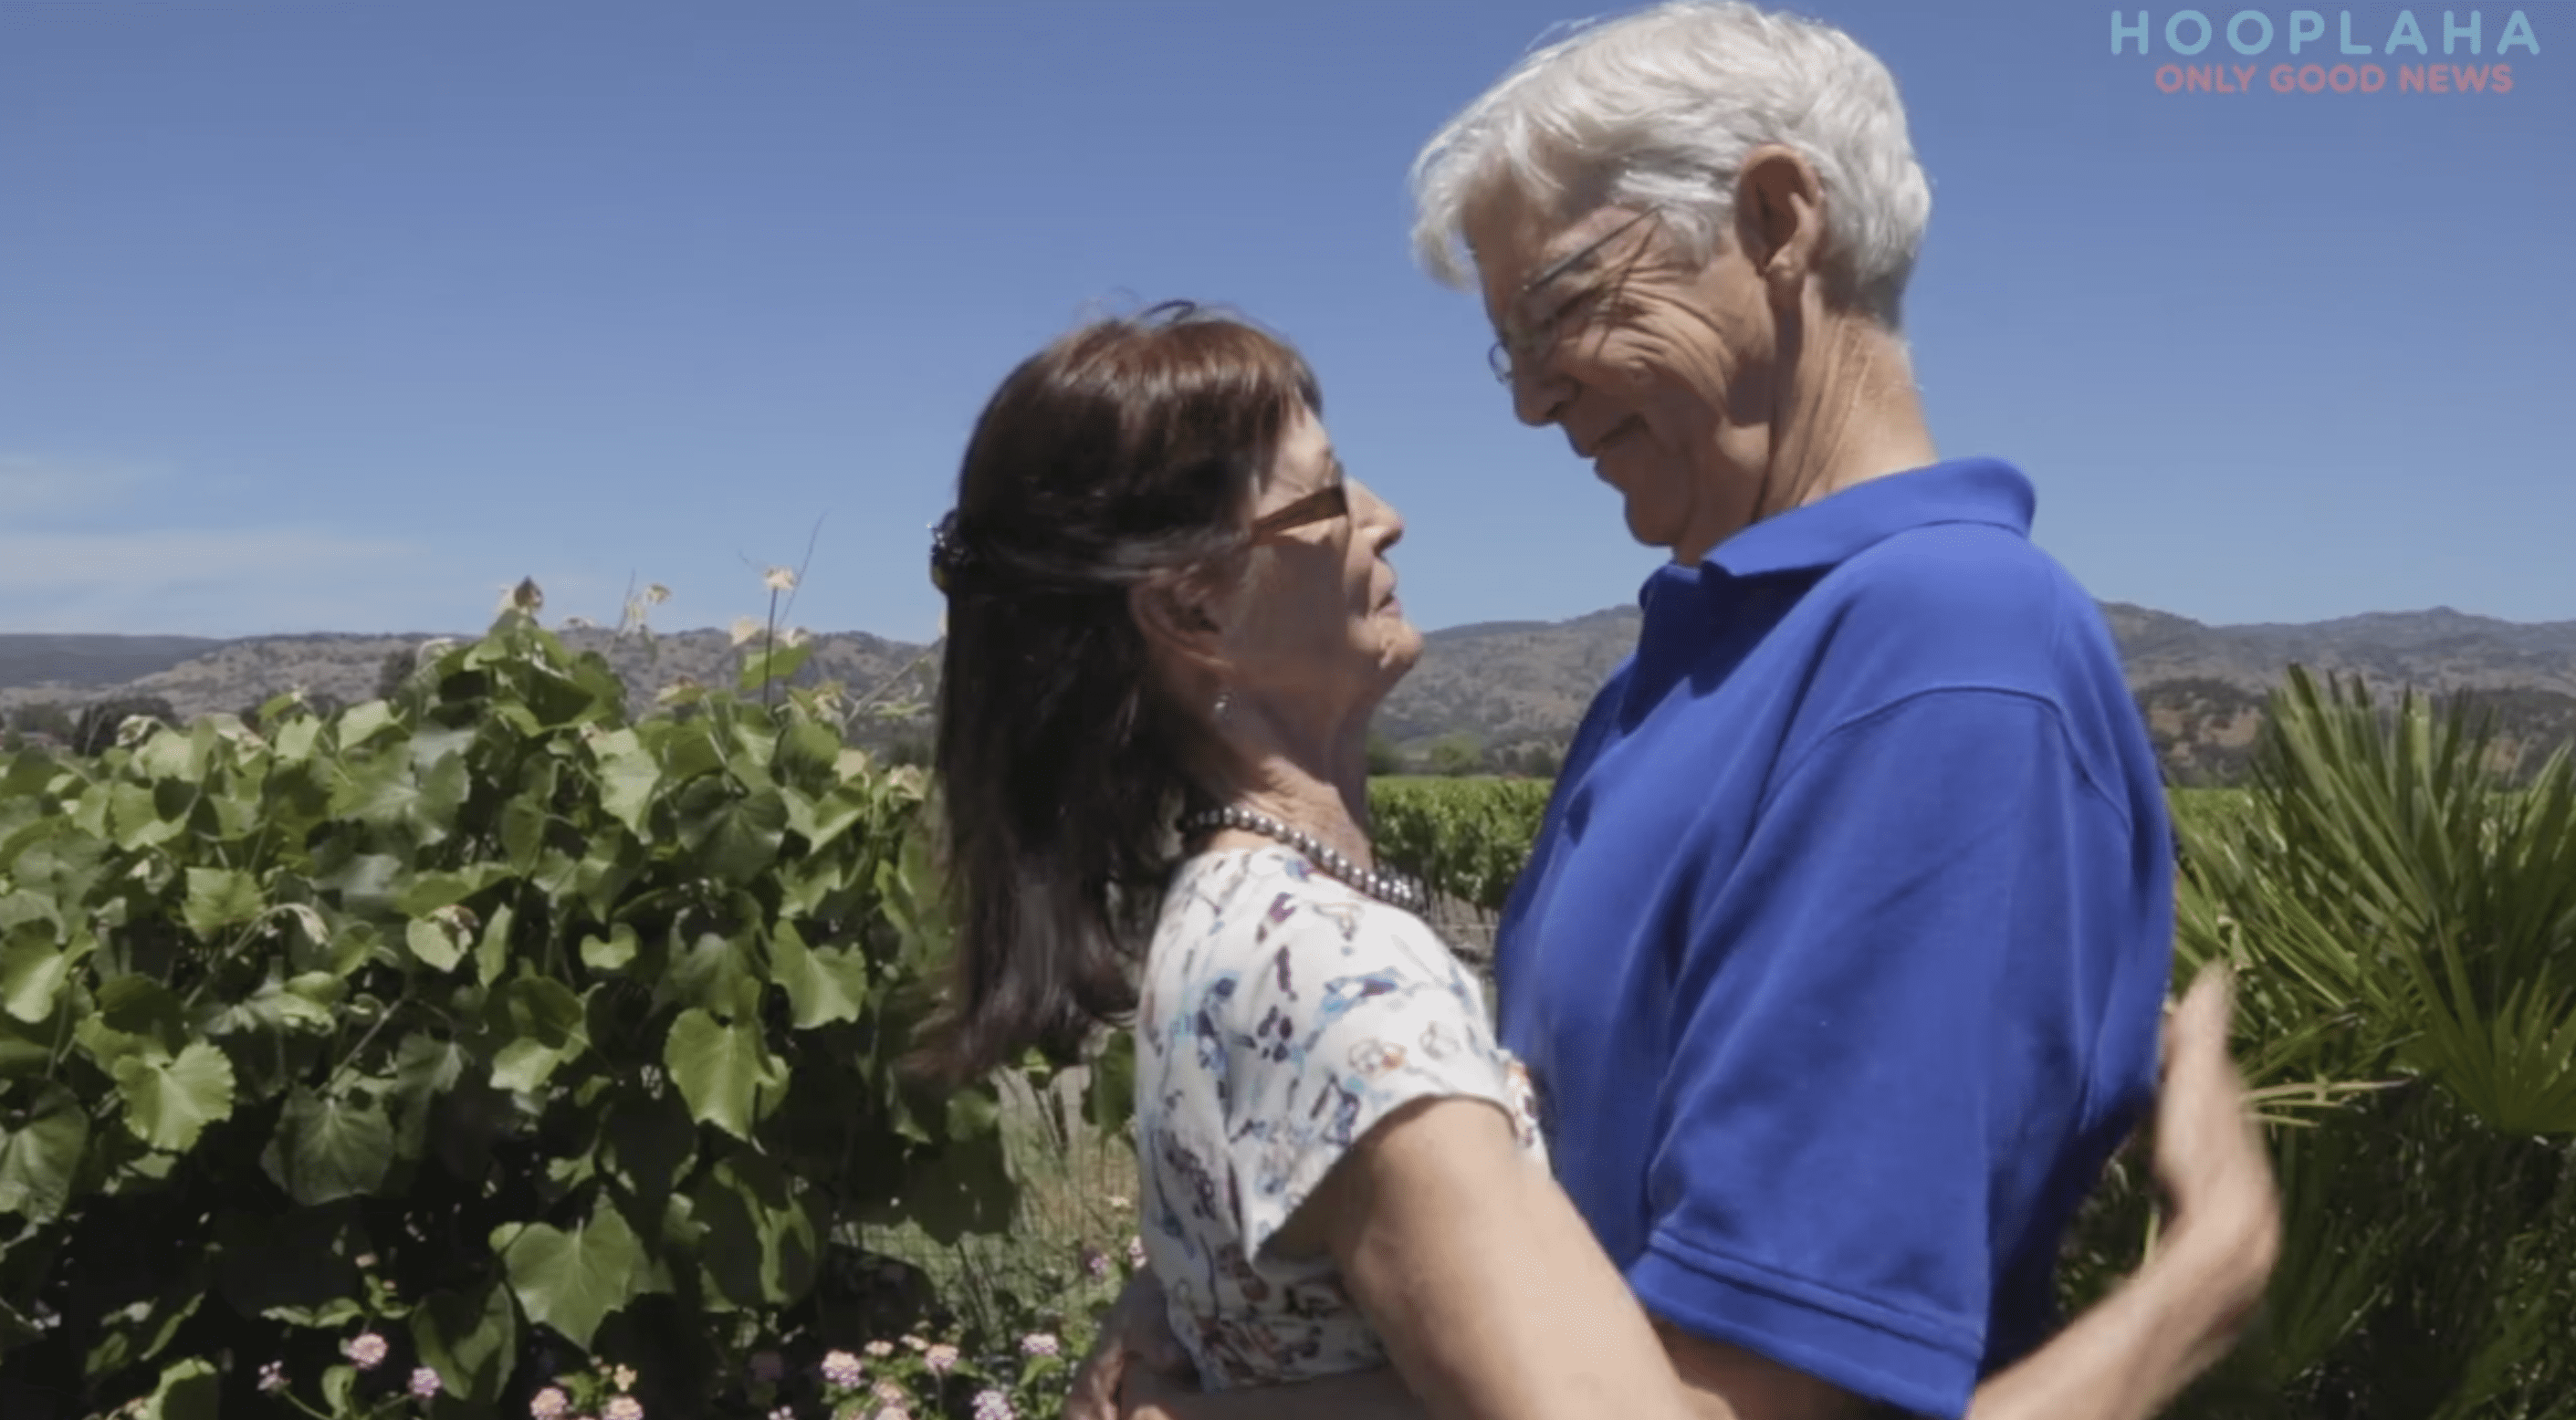 The former lovers met again after 48 years, and discovered that their love was still intact. | Photo: YouTube.com/OnlyGood TV